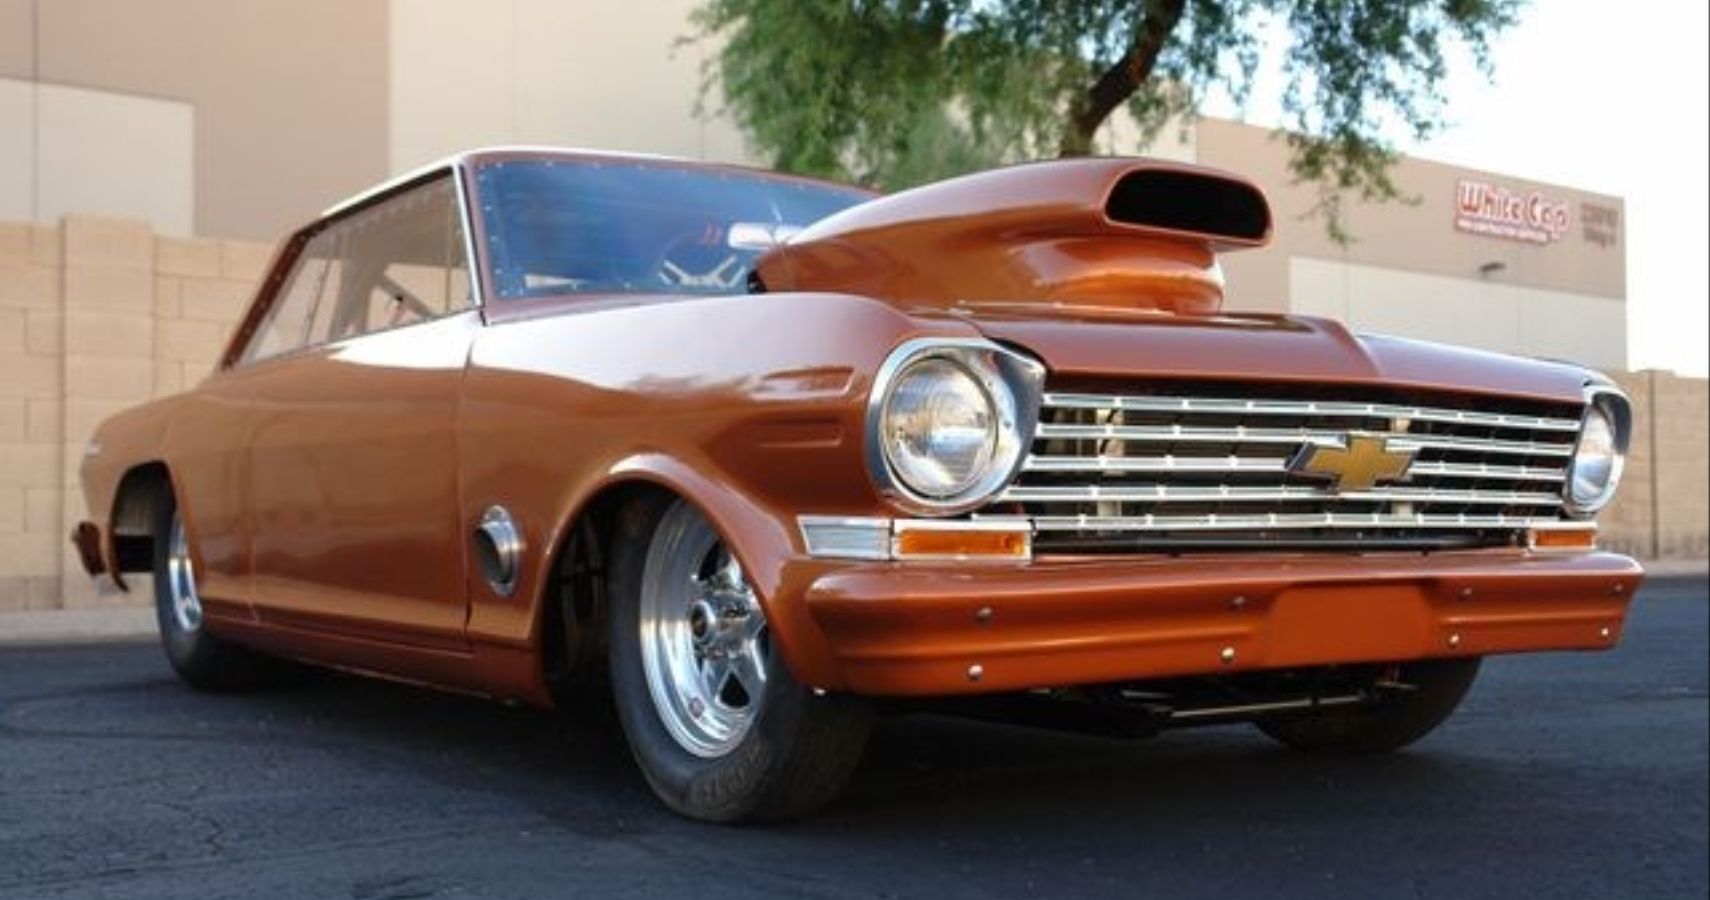 Check Out This Nitrous-Huffing Big-Block Chevy Nova Race Car